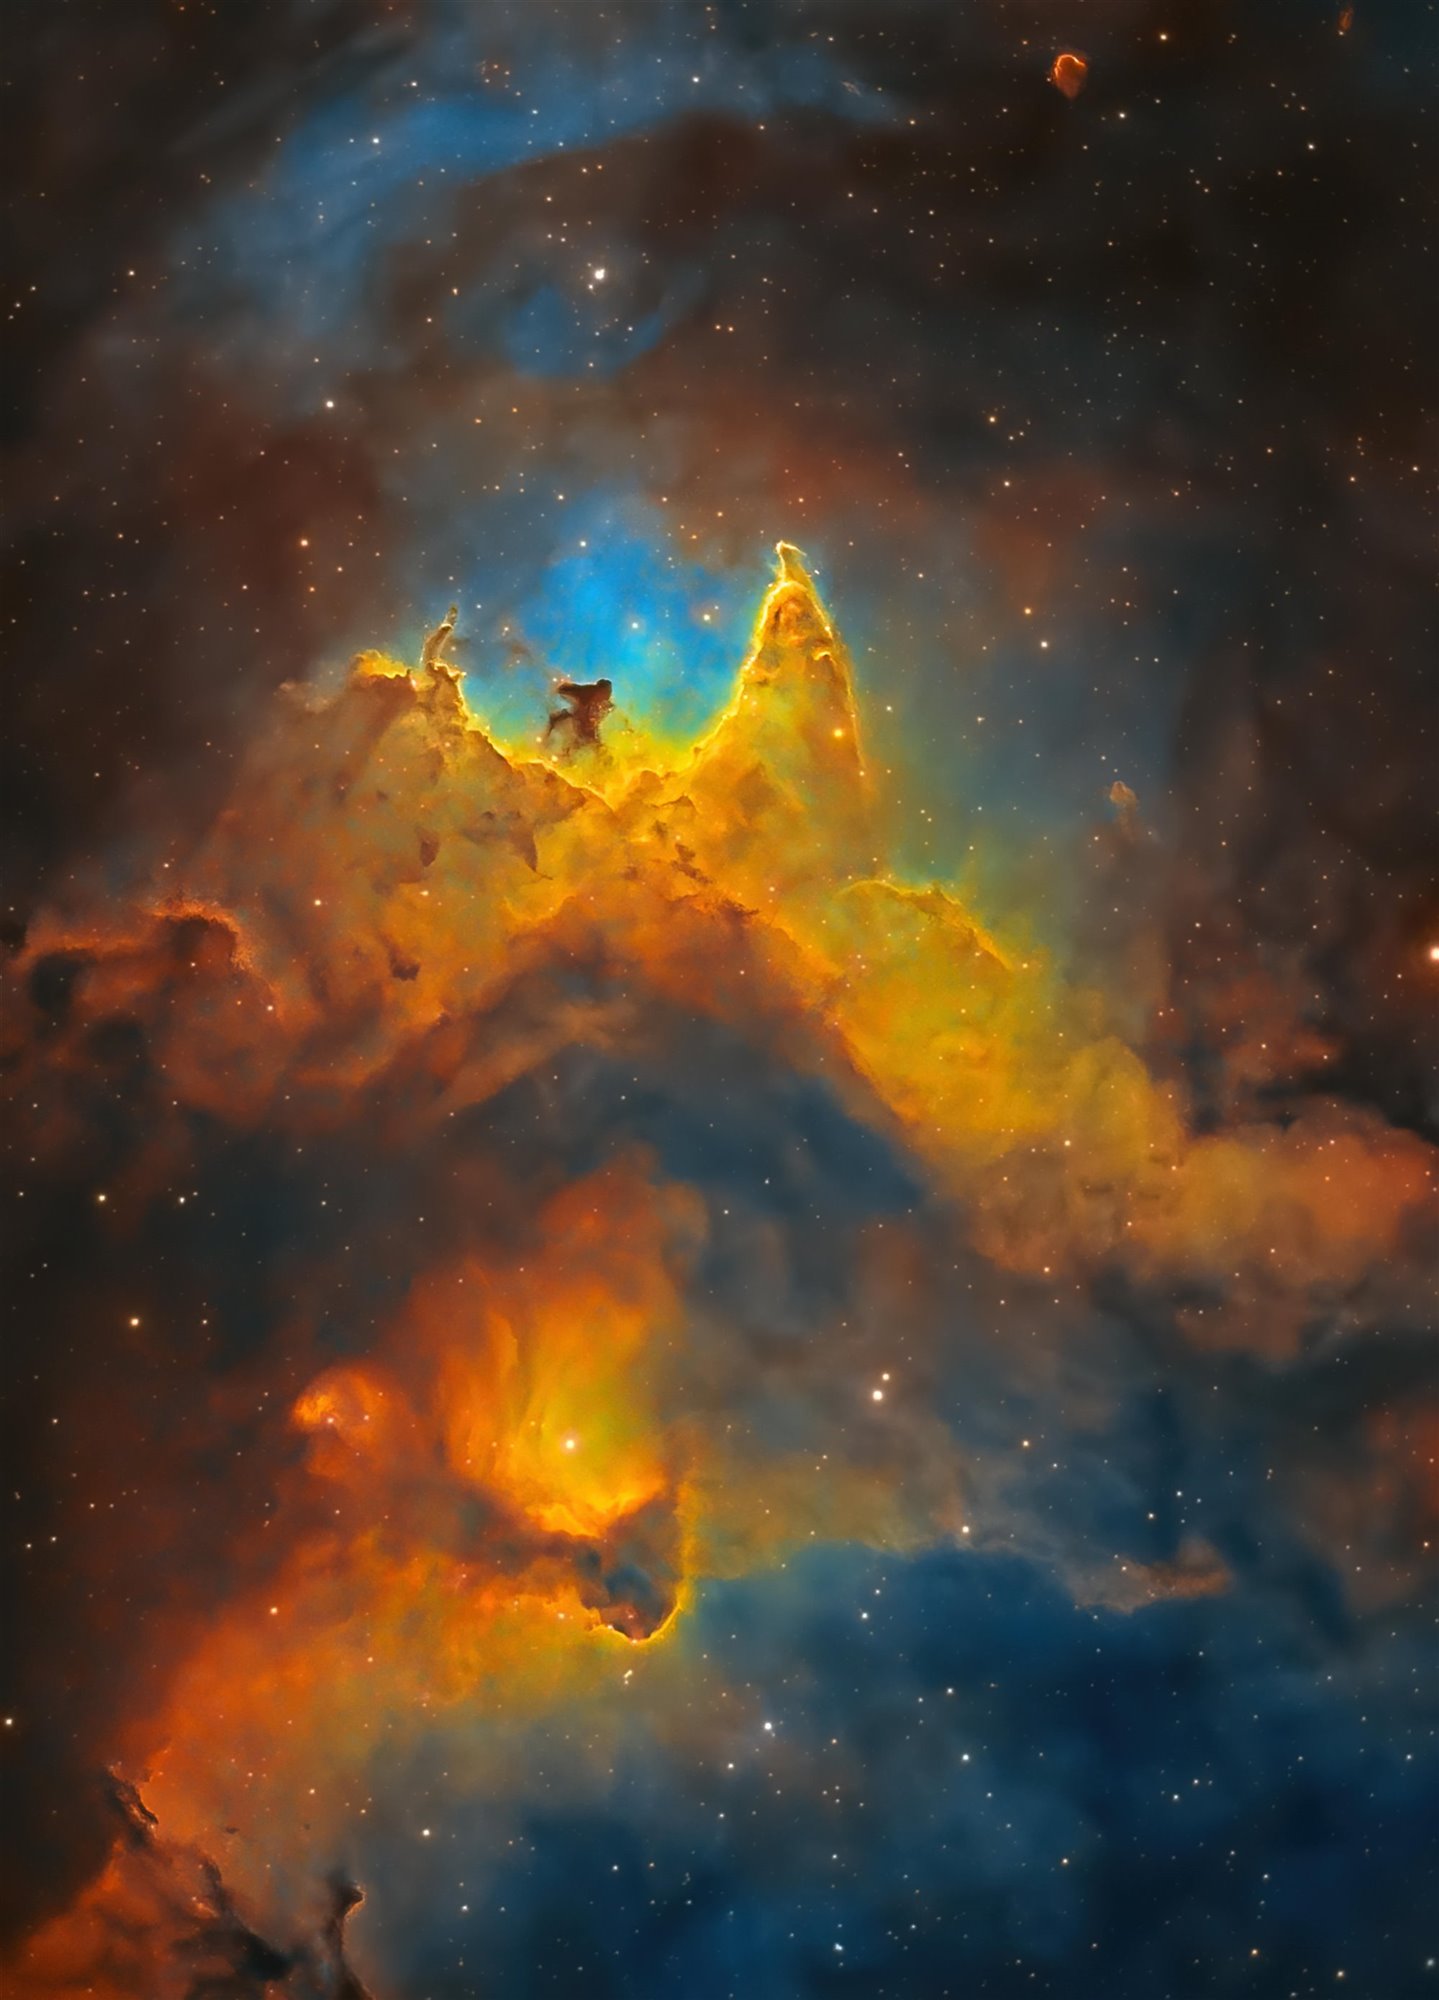 The Soul of Space (Close-up of the Soul Nebula)